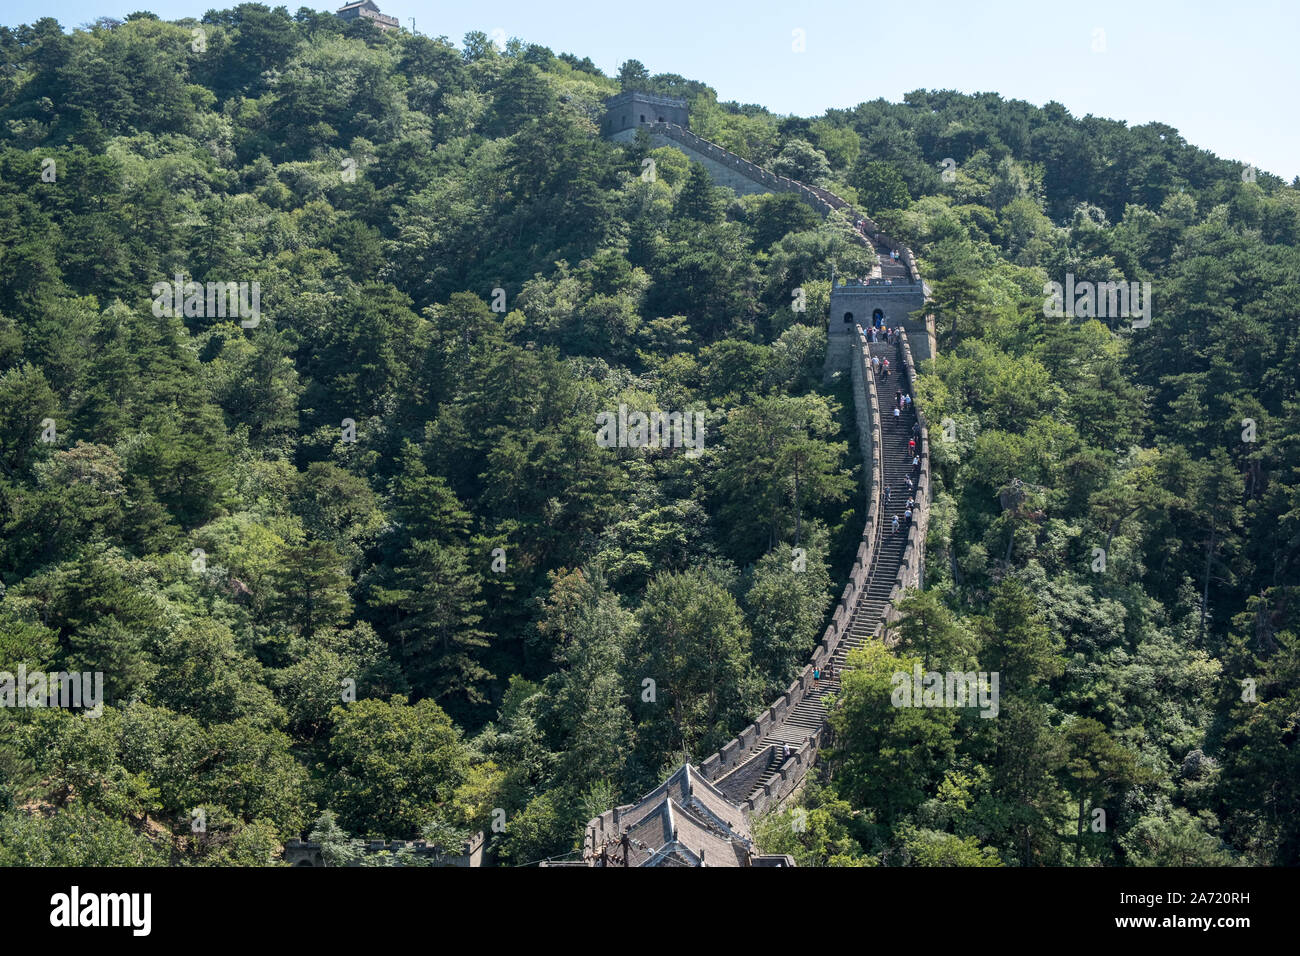 Pictures from the Great Wall of China Stock Photo